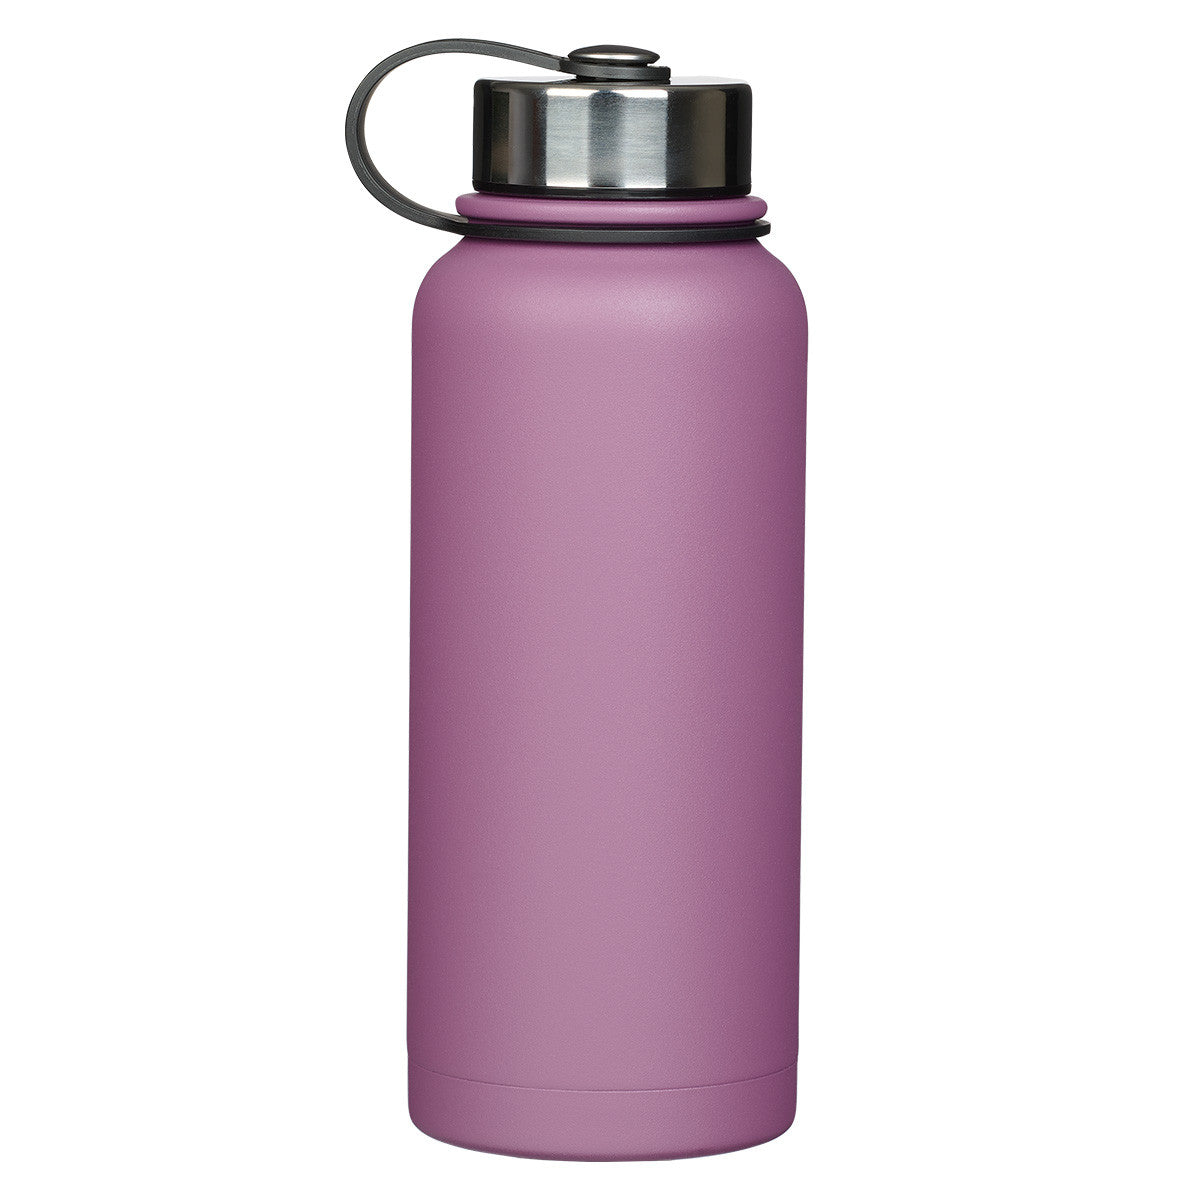 The Plans Lilac Purple Stainless Steel Water Bottle - Jeremiah 29:11 - The Christian Gift Company